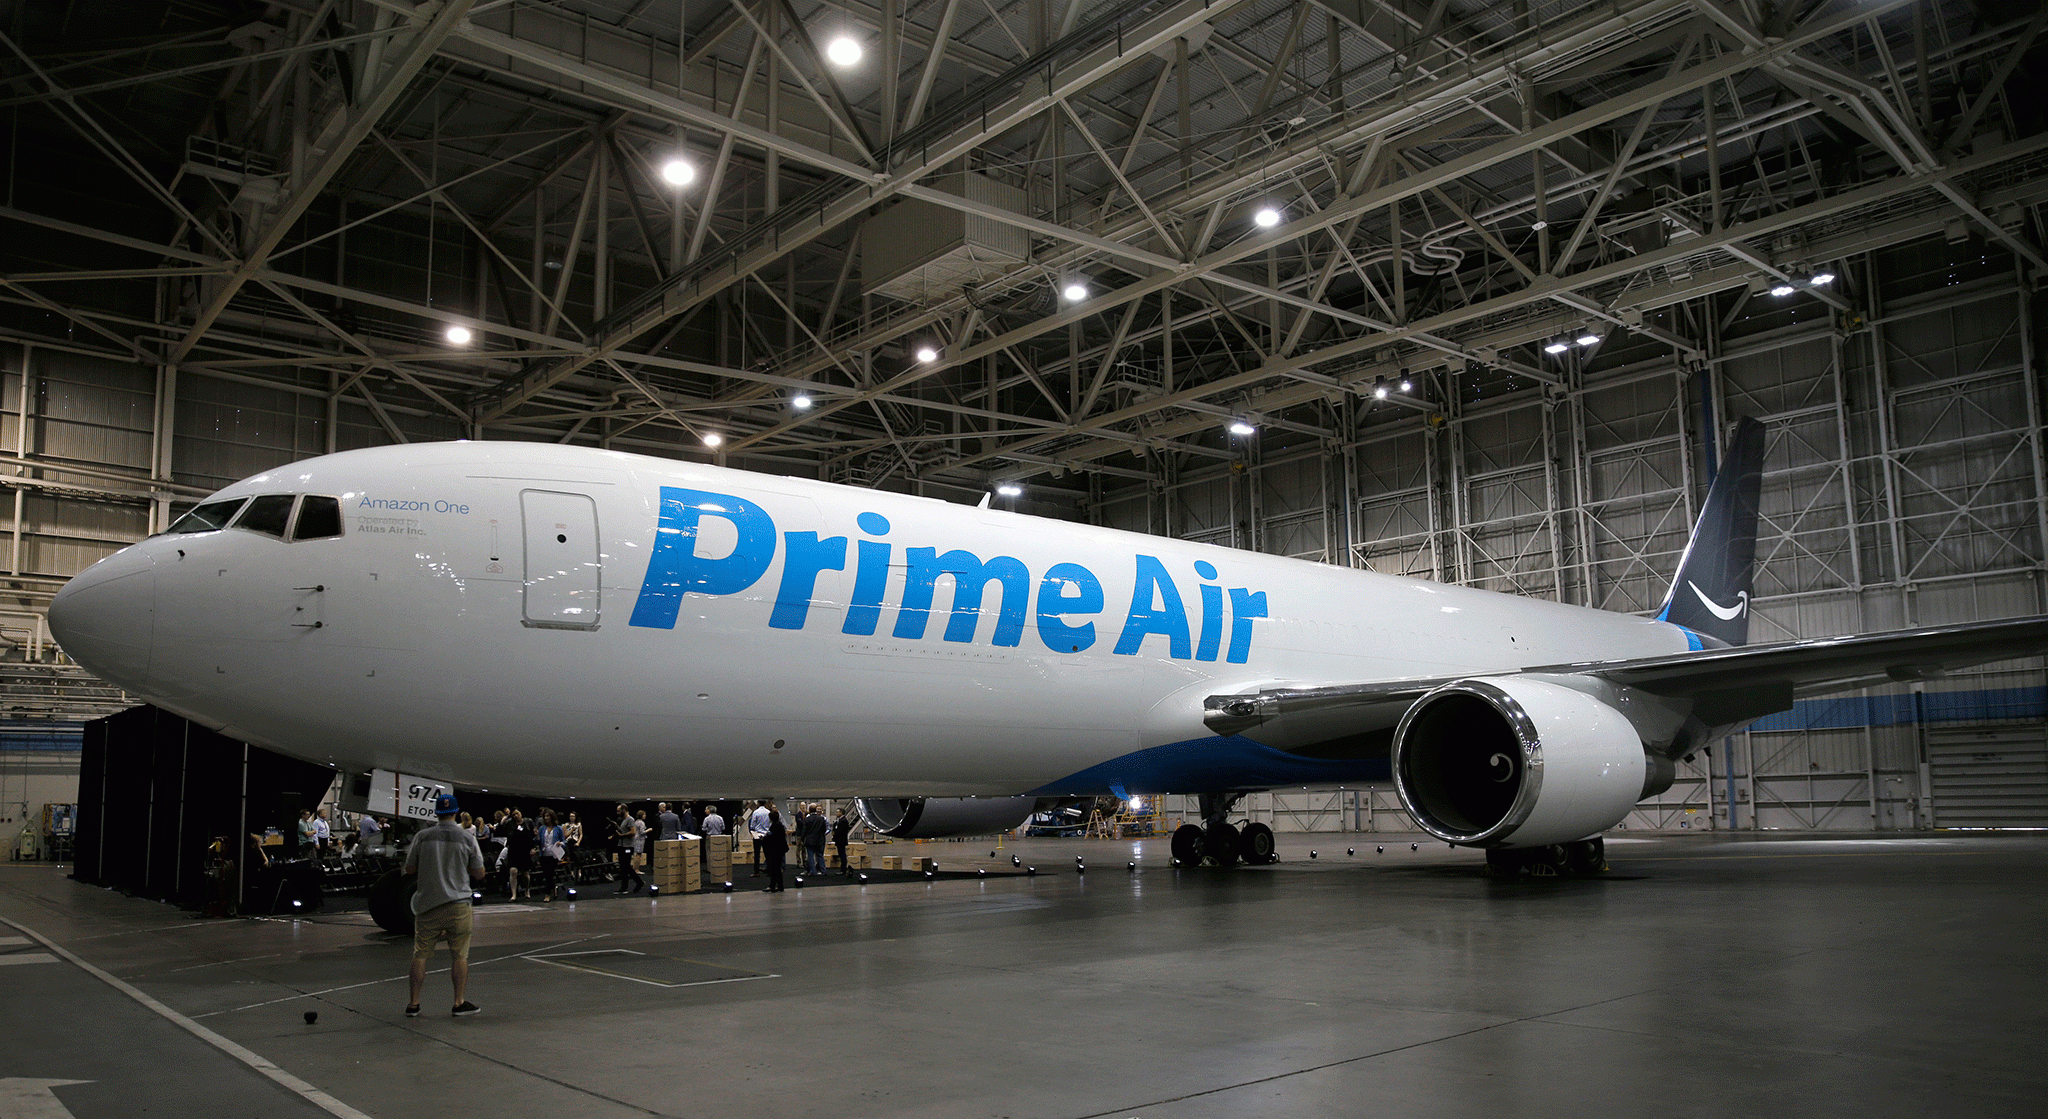 Amazon's first branded cargo plane is one of several initiatives to speed up the delivery process